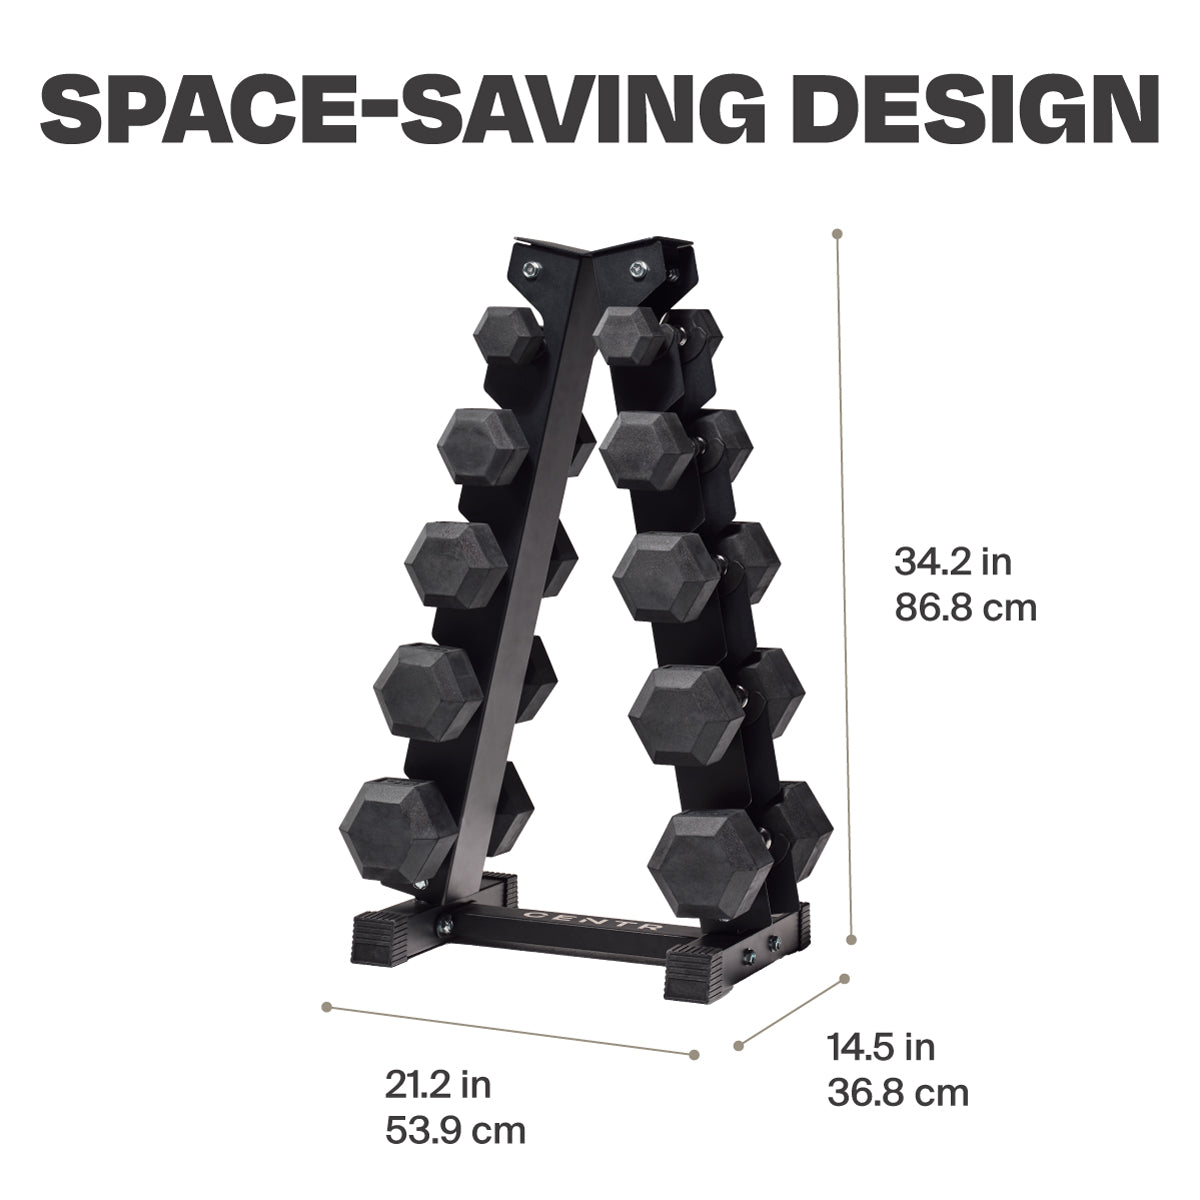 dumbbell weight rack dimensions